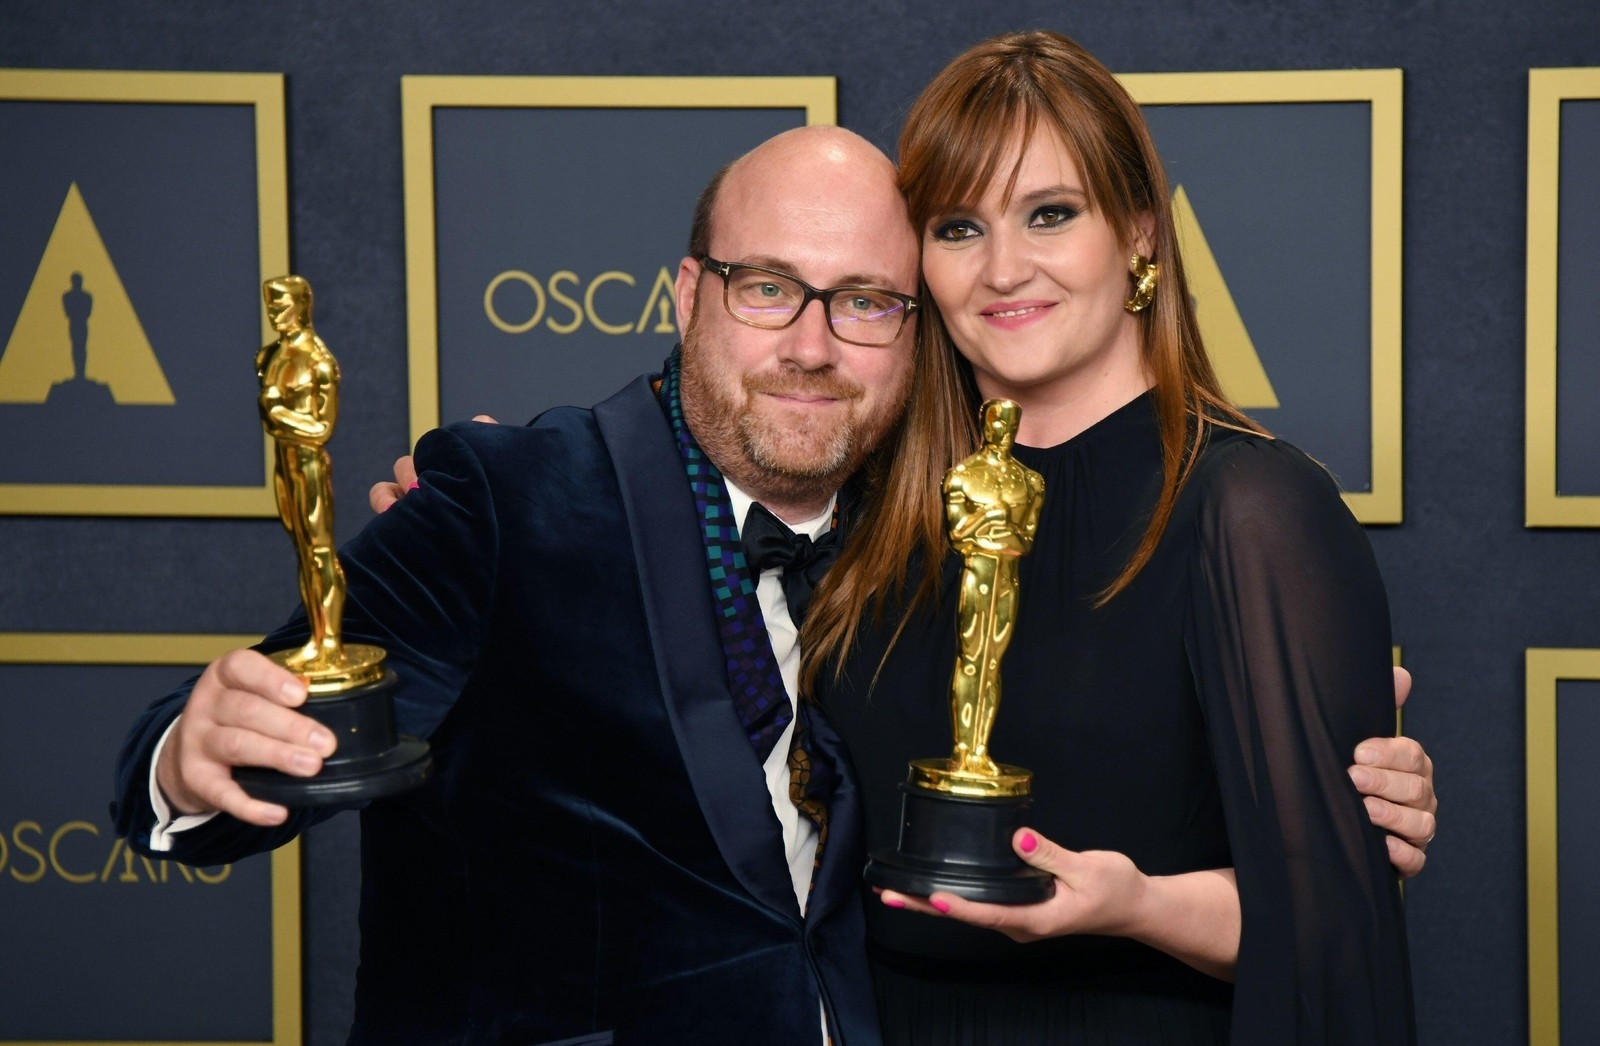 A man and a woman pose for a photo. They are dressed up and are each holding an Oscar Award in their hand.